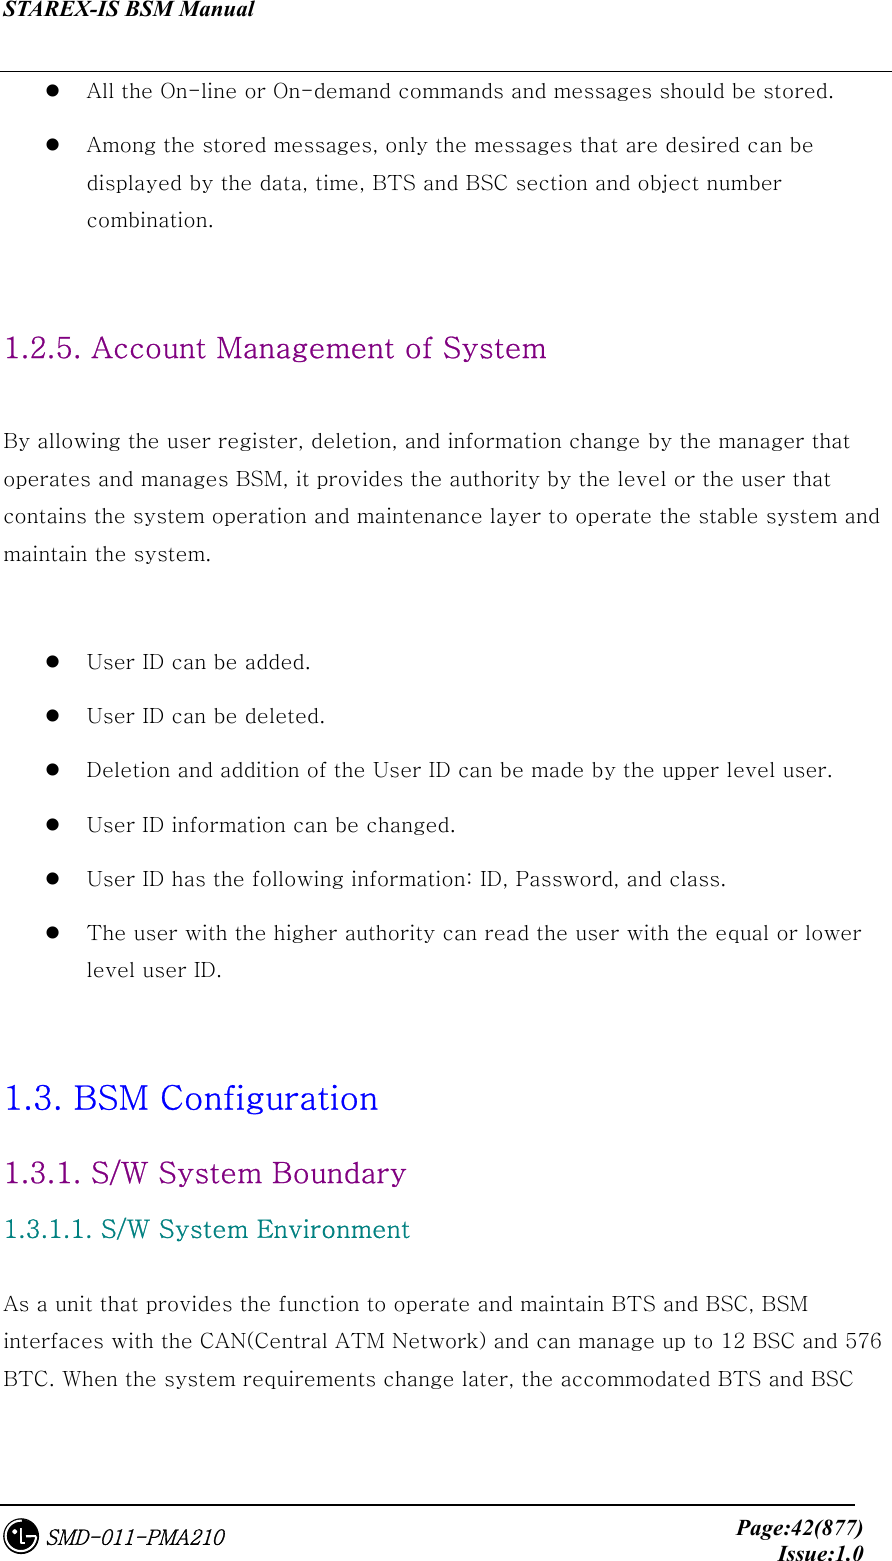 STAREX-IS BSM Manual     Page:42(877)Issue:1.0SMD-011-PMA210   All the On-line or On-demand commands and messages should be stored.     Among the stored messages, only the messages that are desired can be displayed by the data, time, BTS and BSC section and object number combination.  1.2.5. Account Management of System  By allowing the user register, deletion, and information change by the manager that operates and manages BSM, it provides the authority by the level or the user that contains the system operation and maintenance layer to operate the stable system and maintain the system.    User ID can be added.     User ID can be deleted.   Deletion and addition of the User ID can be made by the upper level user.   User ID information can be changed.   User ID has the following information: ID, Password, and class.    The user with the higher authority can read the user with the equal or lower level user ID.    1.3. BSM Configuration 1.3.1. S/W System Boundary 1.3.1.1. S/W System Environment  As a unit that provides the function to operate and maintain BTS and BSC, BSM interfaces with the CAN(Central ATM Network) and can manage up to 12 BSC and 576 BTC. When the system requirements change later, the accommodated BTS and BSC 